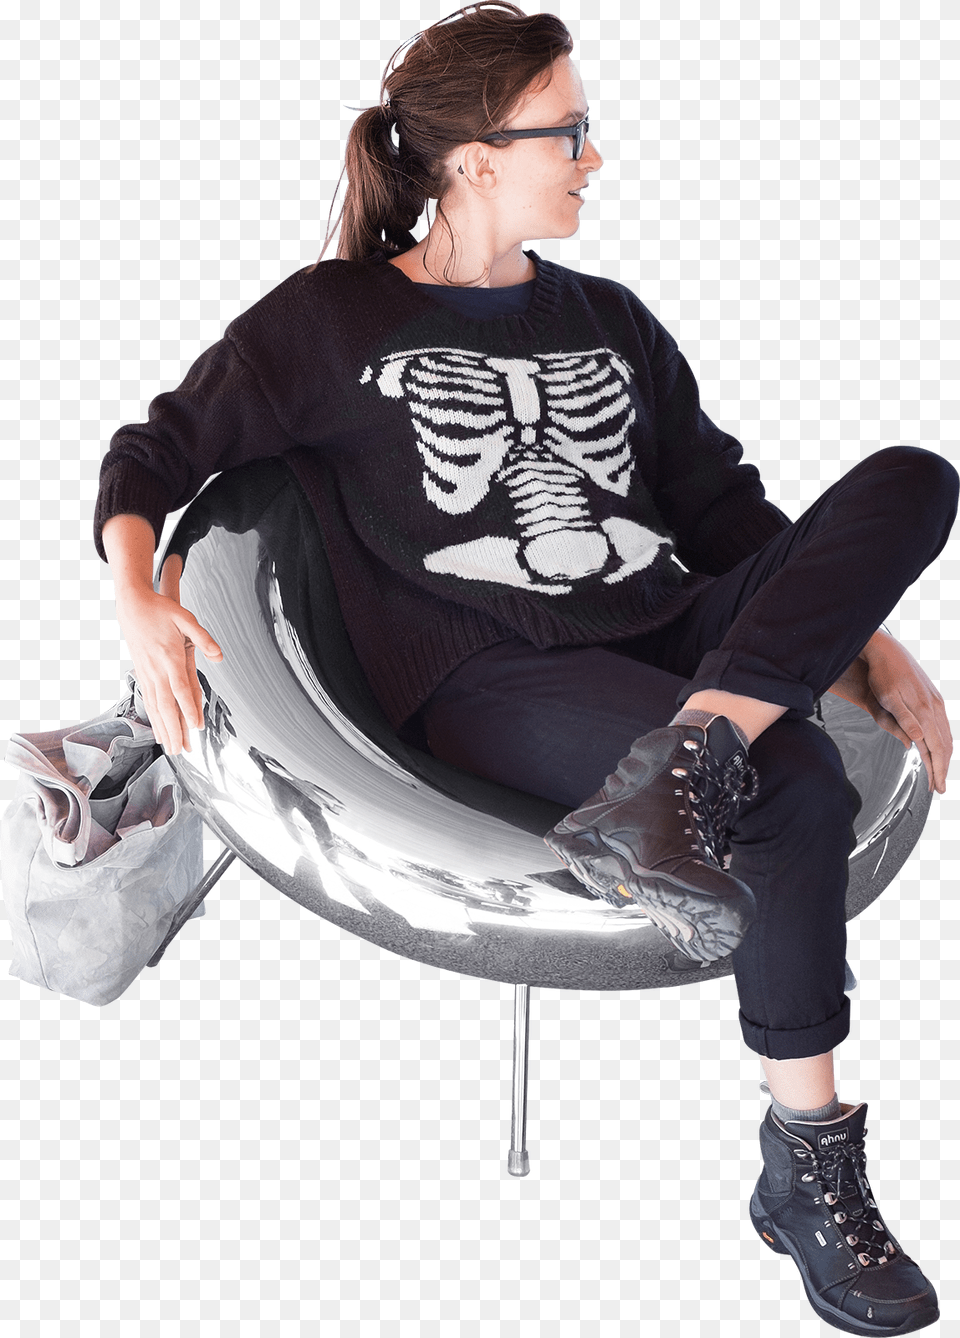 A Sitting In One Of The Many Fancy Polished Chairs People Sitting On Chair Psd, Sneaker, Clothing, Footwear, Shoe Png Image